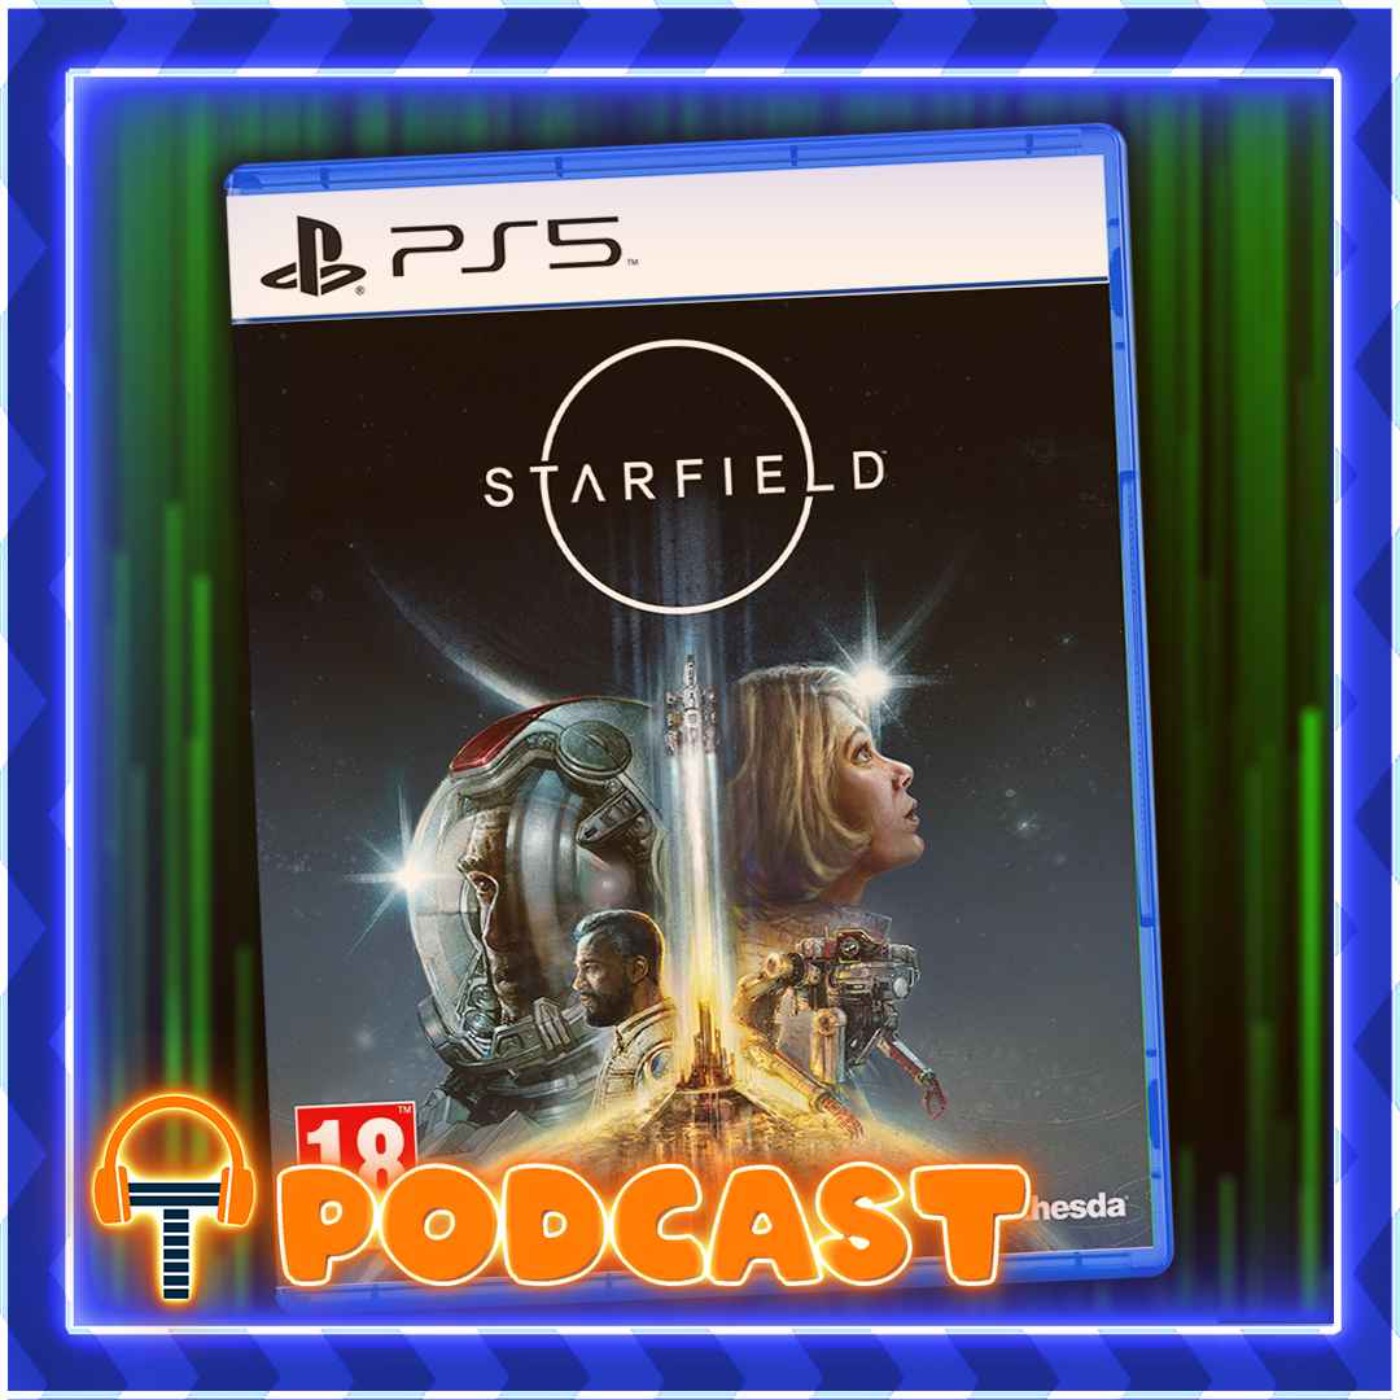 TripleJump Podcast 257: Xbox - Could Starfield & Gears Of War Come To PS5?